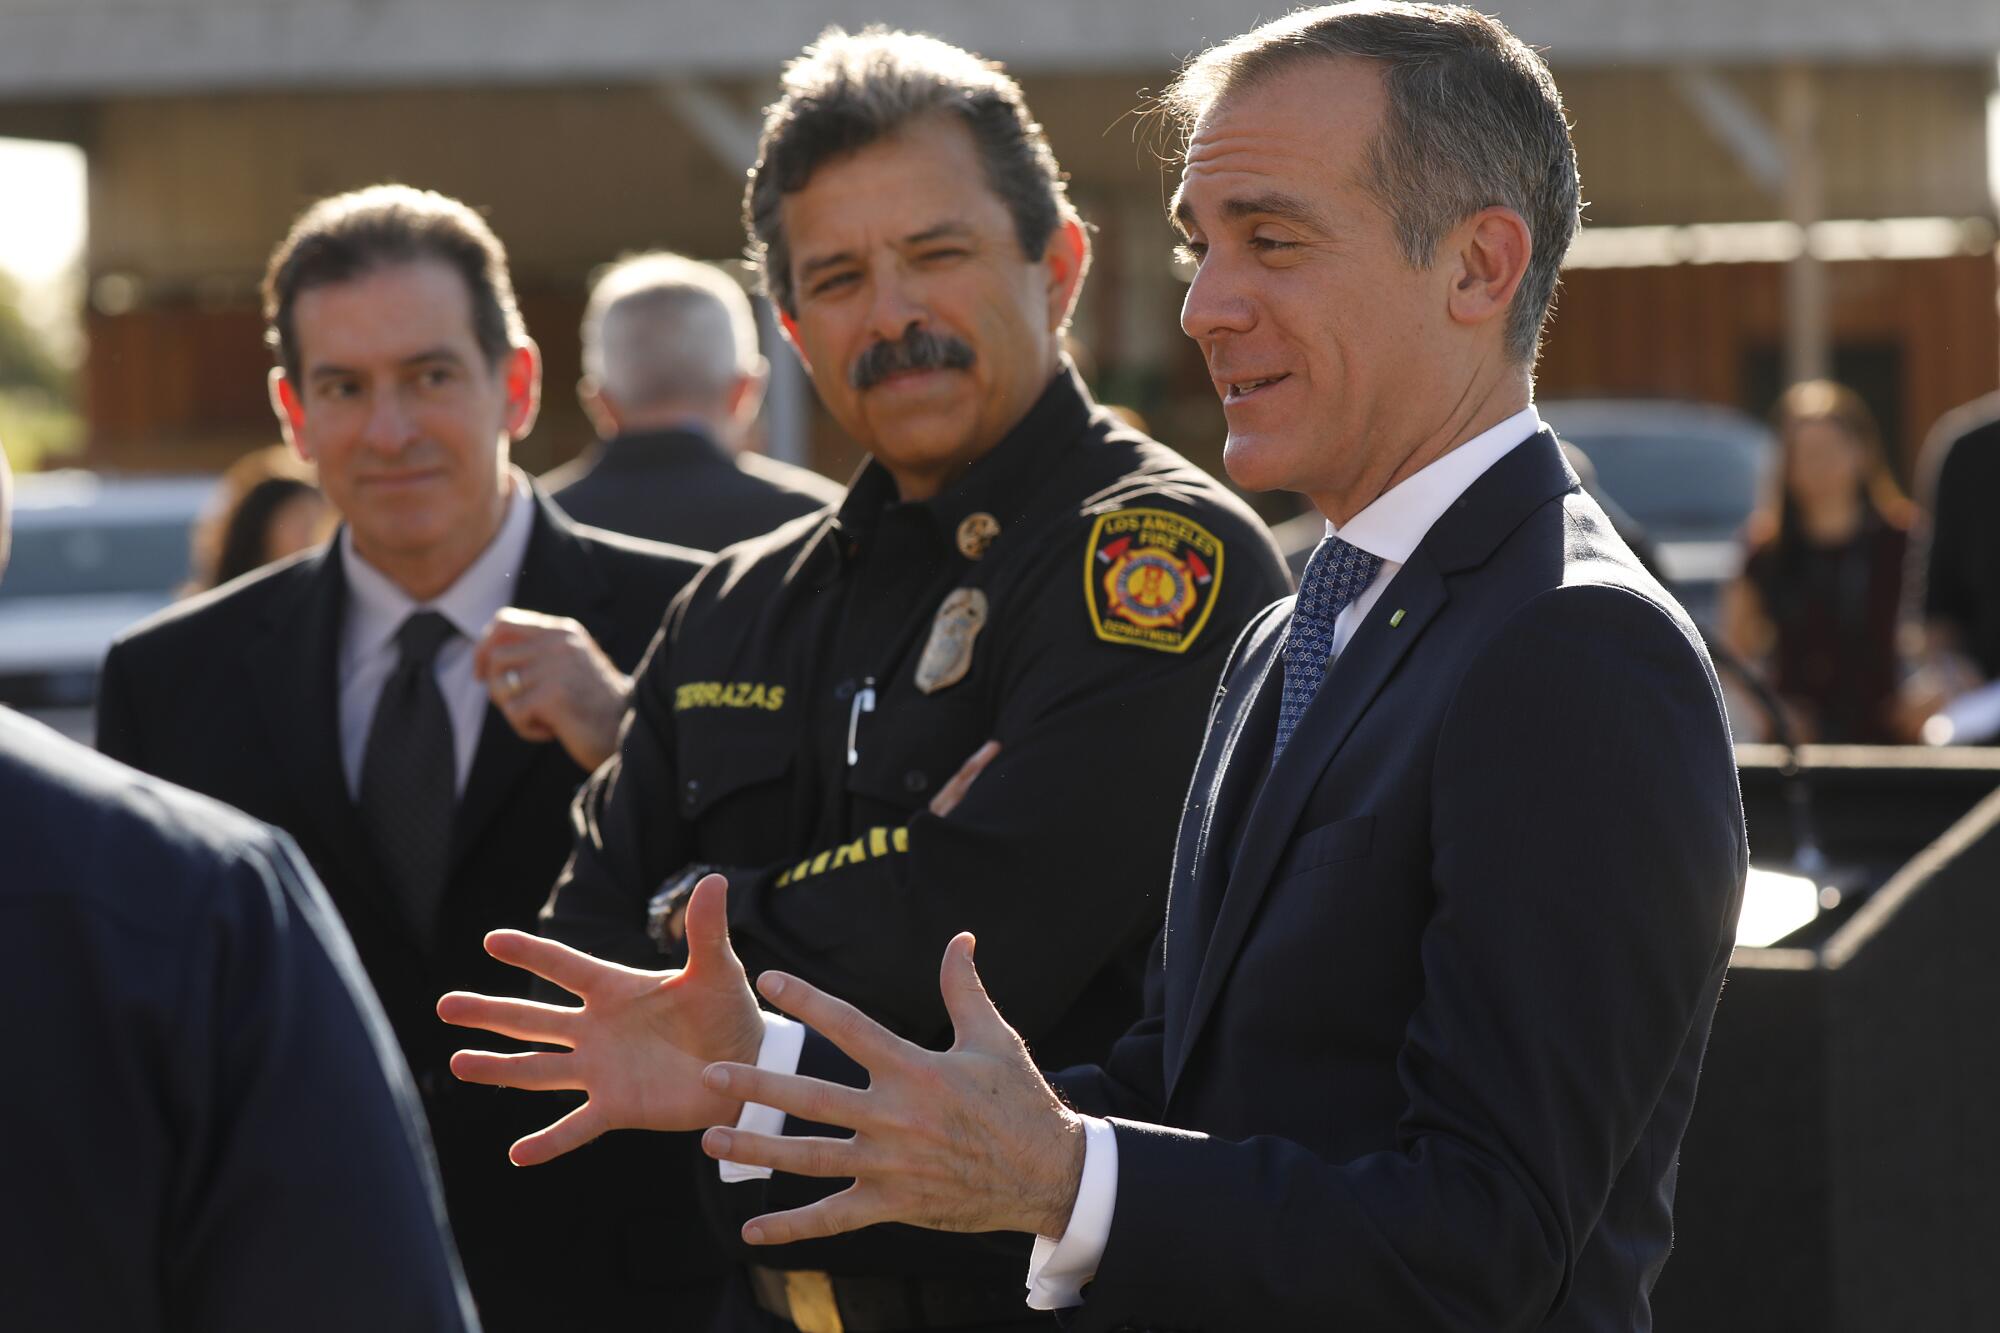 A fire chief in uniform stands between men in suits at a news conference.